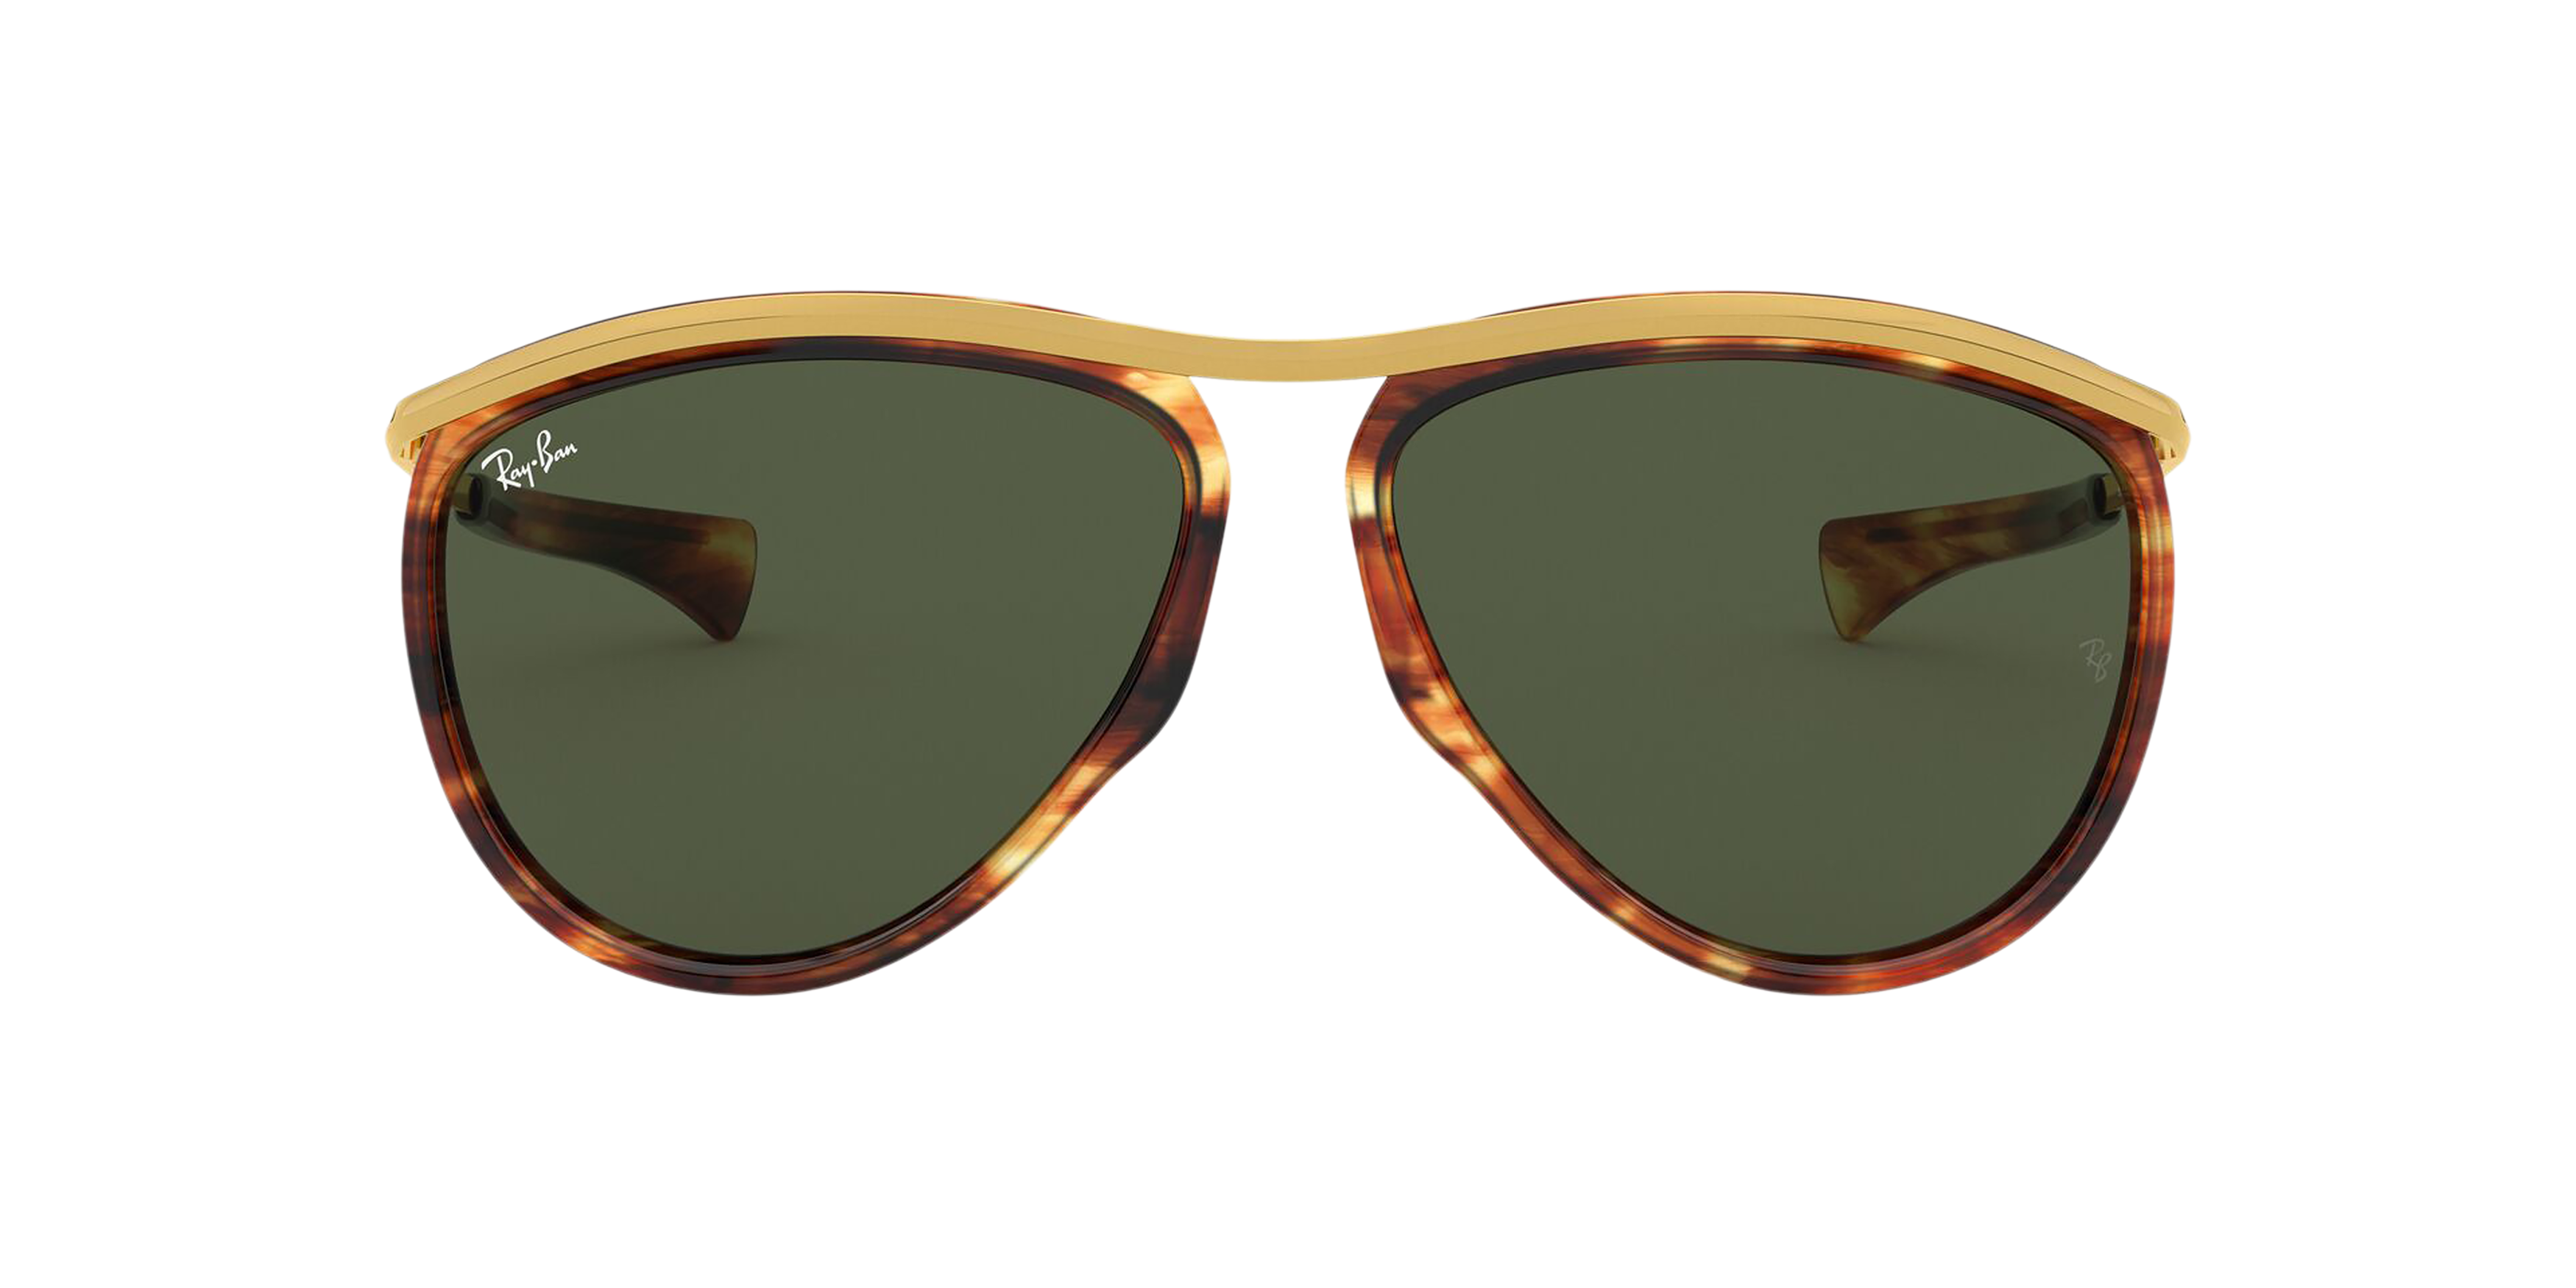 [products.image.front] Ray-Ban Olympian Aviator RB2219 954/31